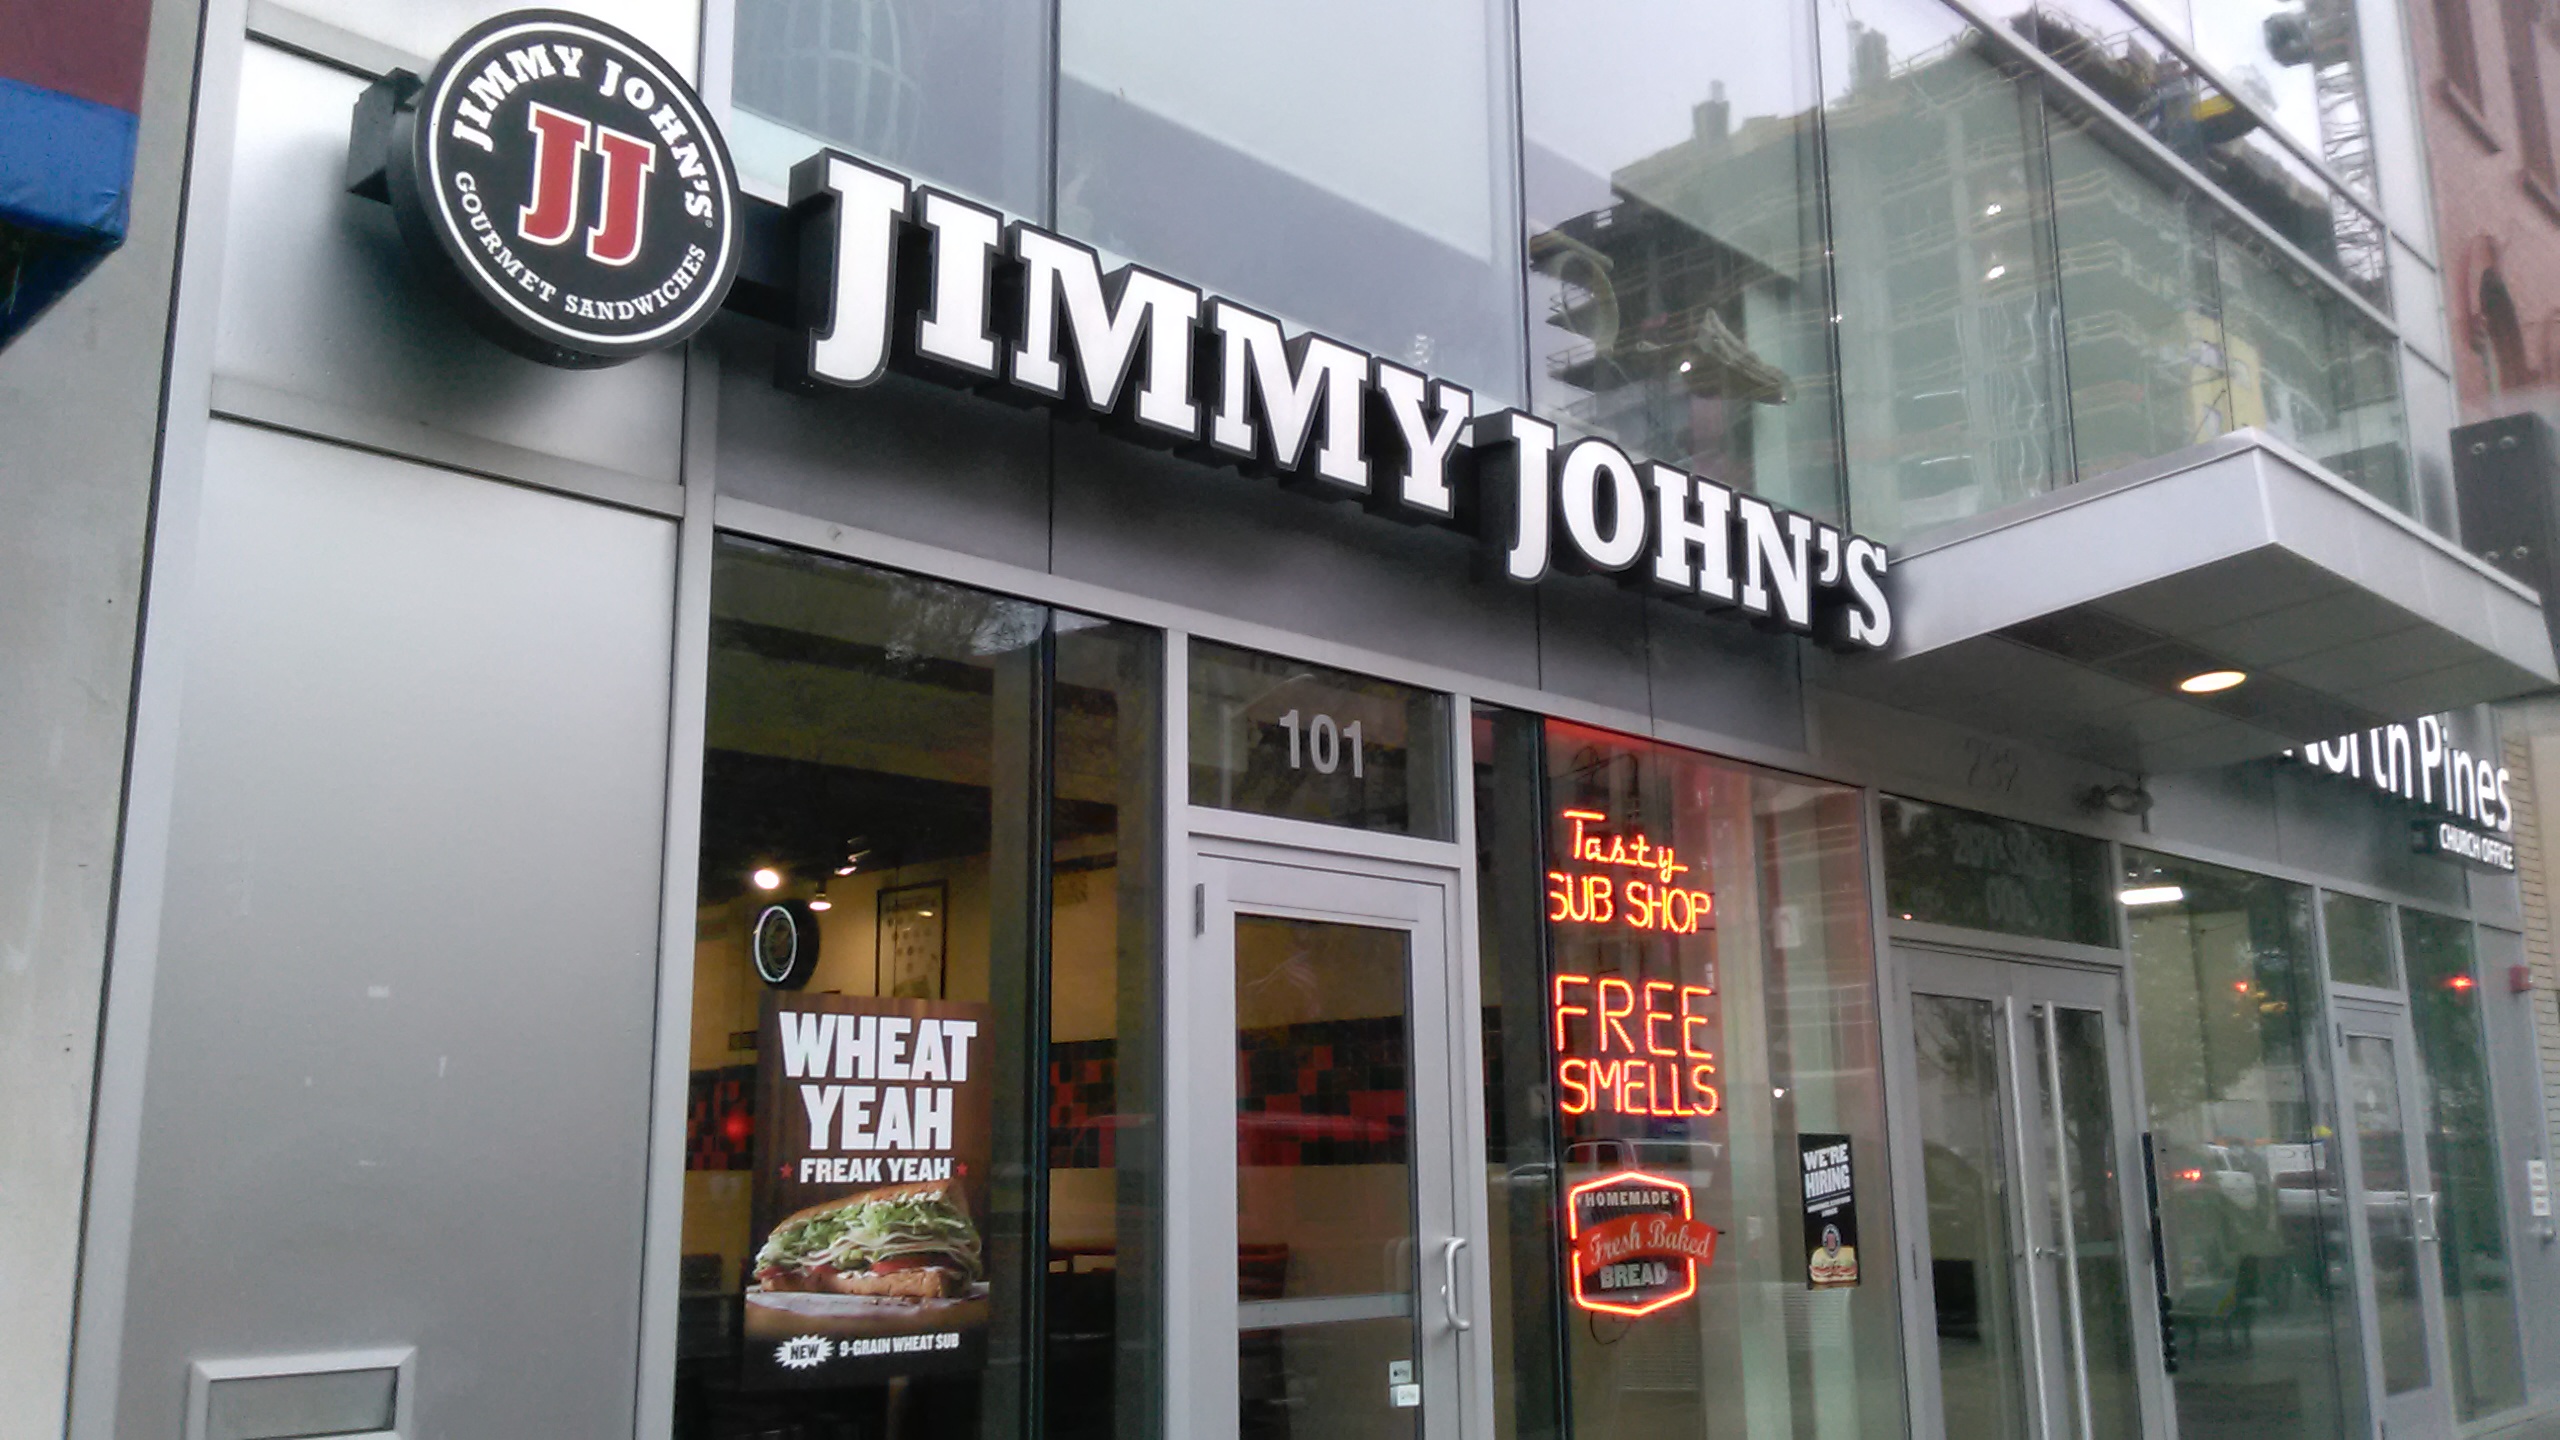 Outside view of a modern Jimmy Johns with neon signs reading "tasy sub shop" and "free smells"